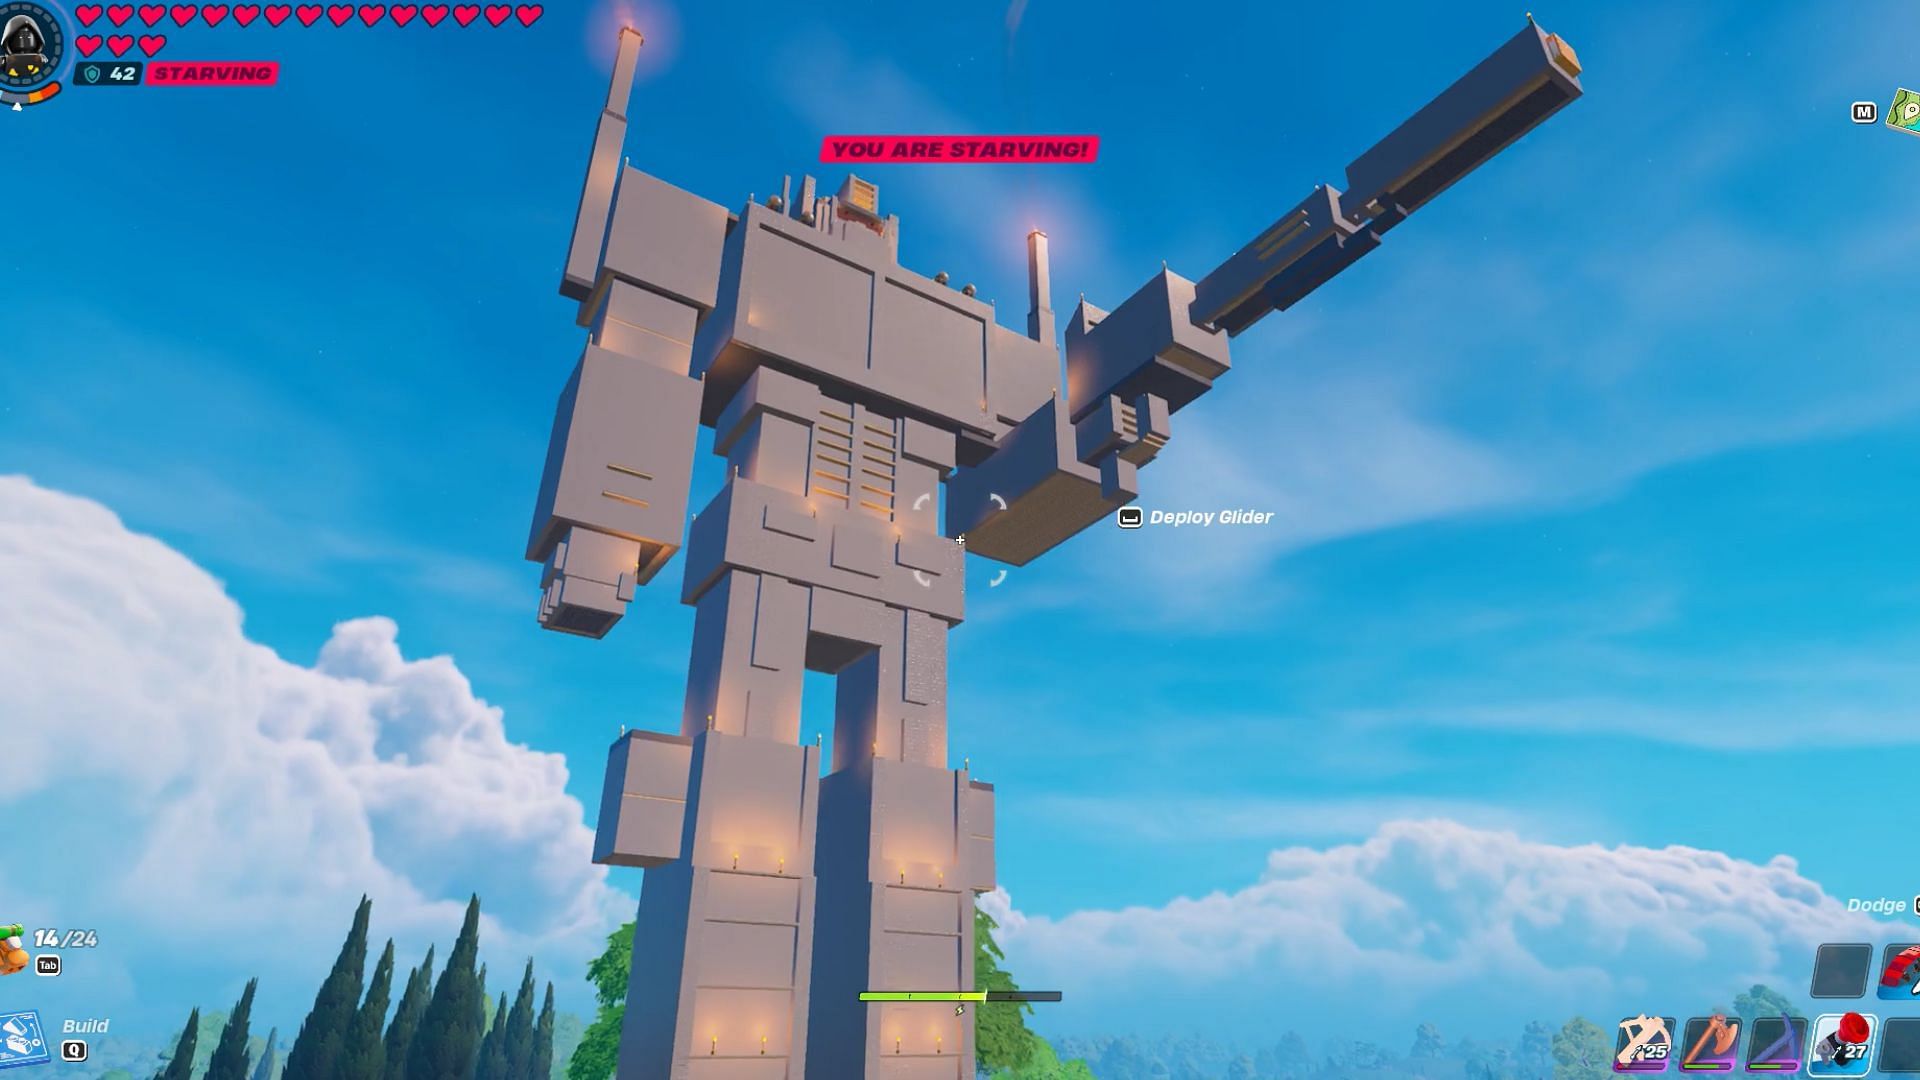 LEGO Fortnite player spends work from home building Optimus Prime in-game, community left amazed